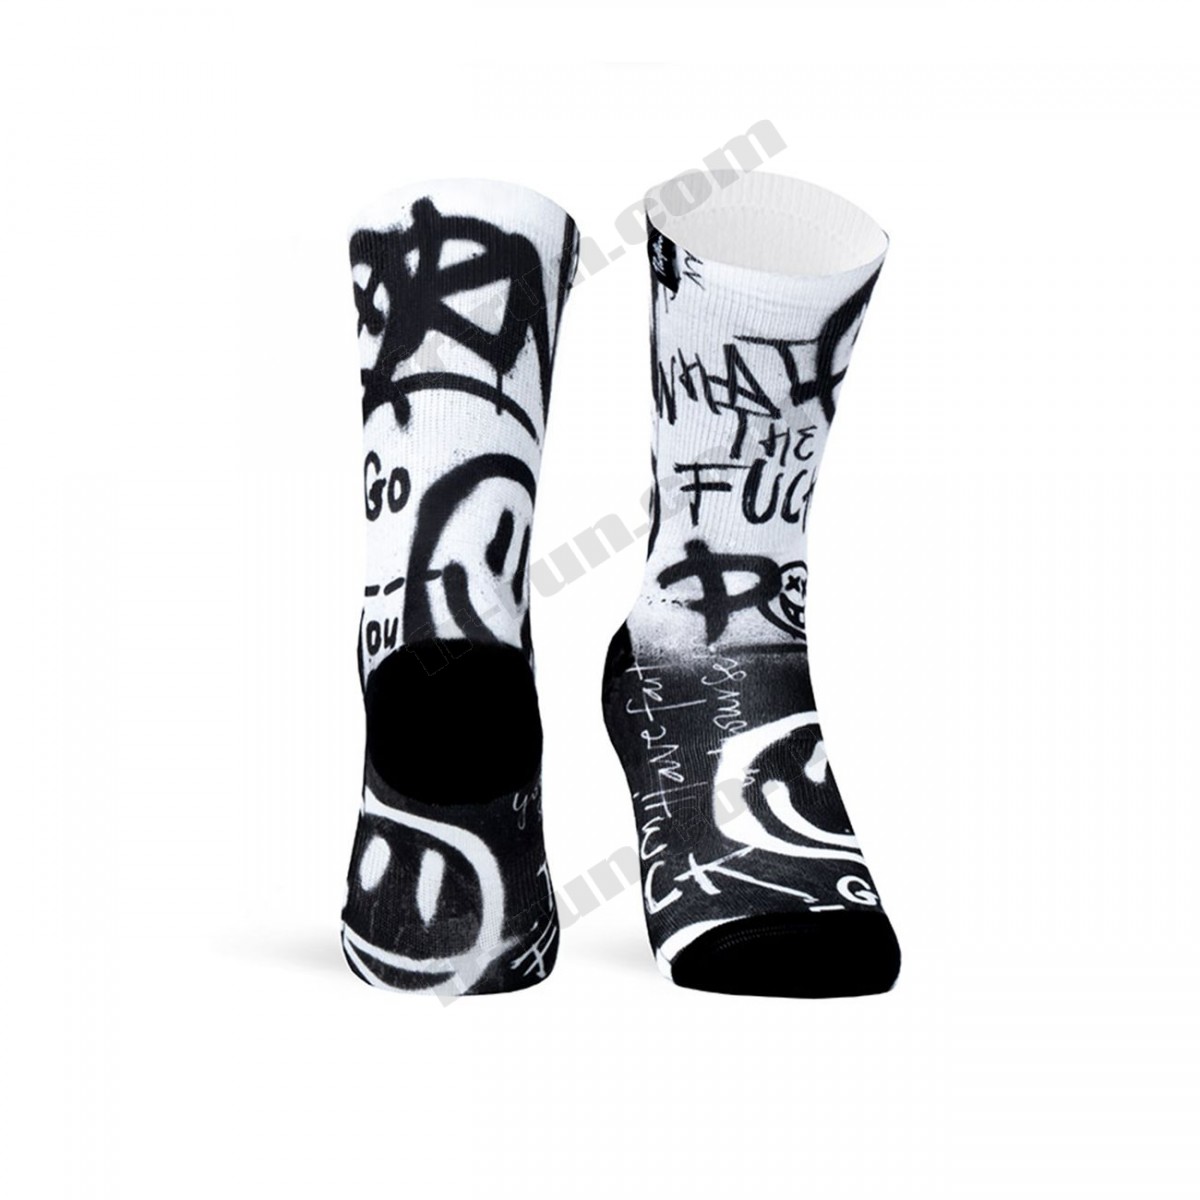 Pacific And Co/running adulte PACIFIC and CO ACIDBW Unisex Performance Socks ◇◇◇ Pas Cher Du Tout - Pacific And Co/running adulte PACIFIC and CO ACIDBW Unisex Performance Socks ◇◇◇ Pas Cher Du Tout